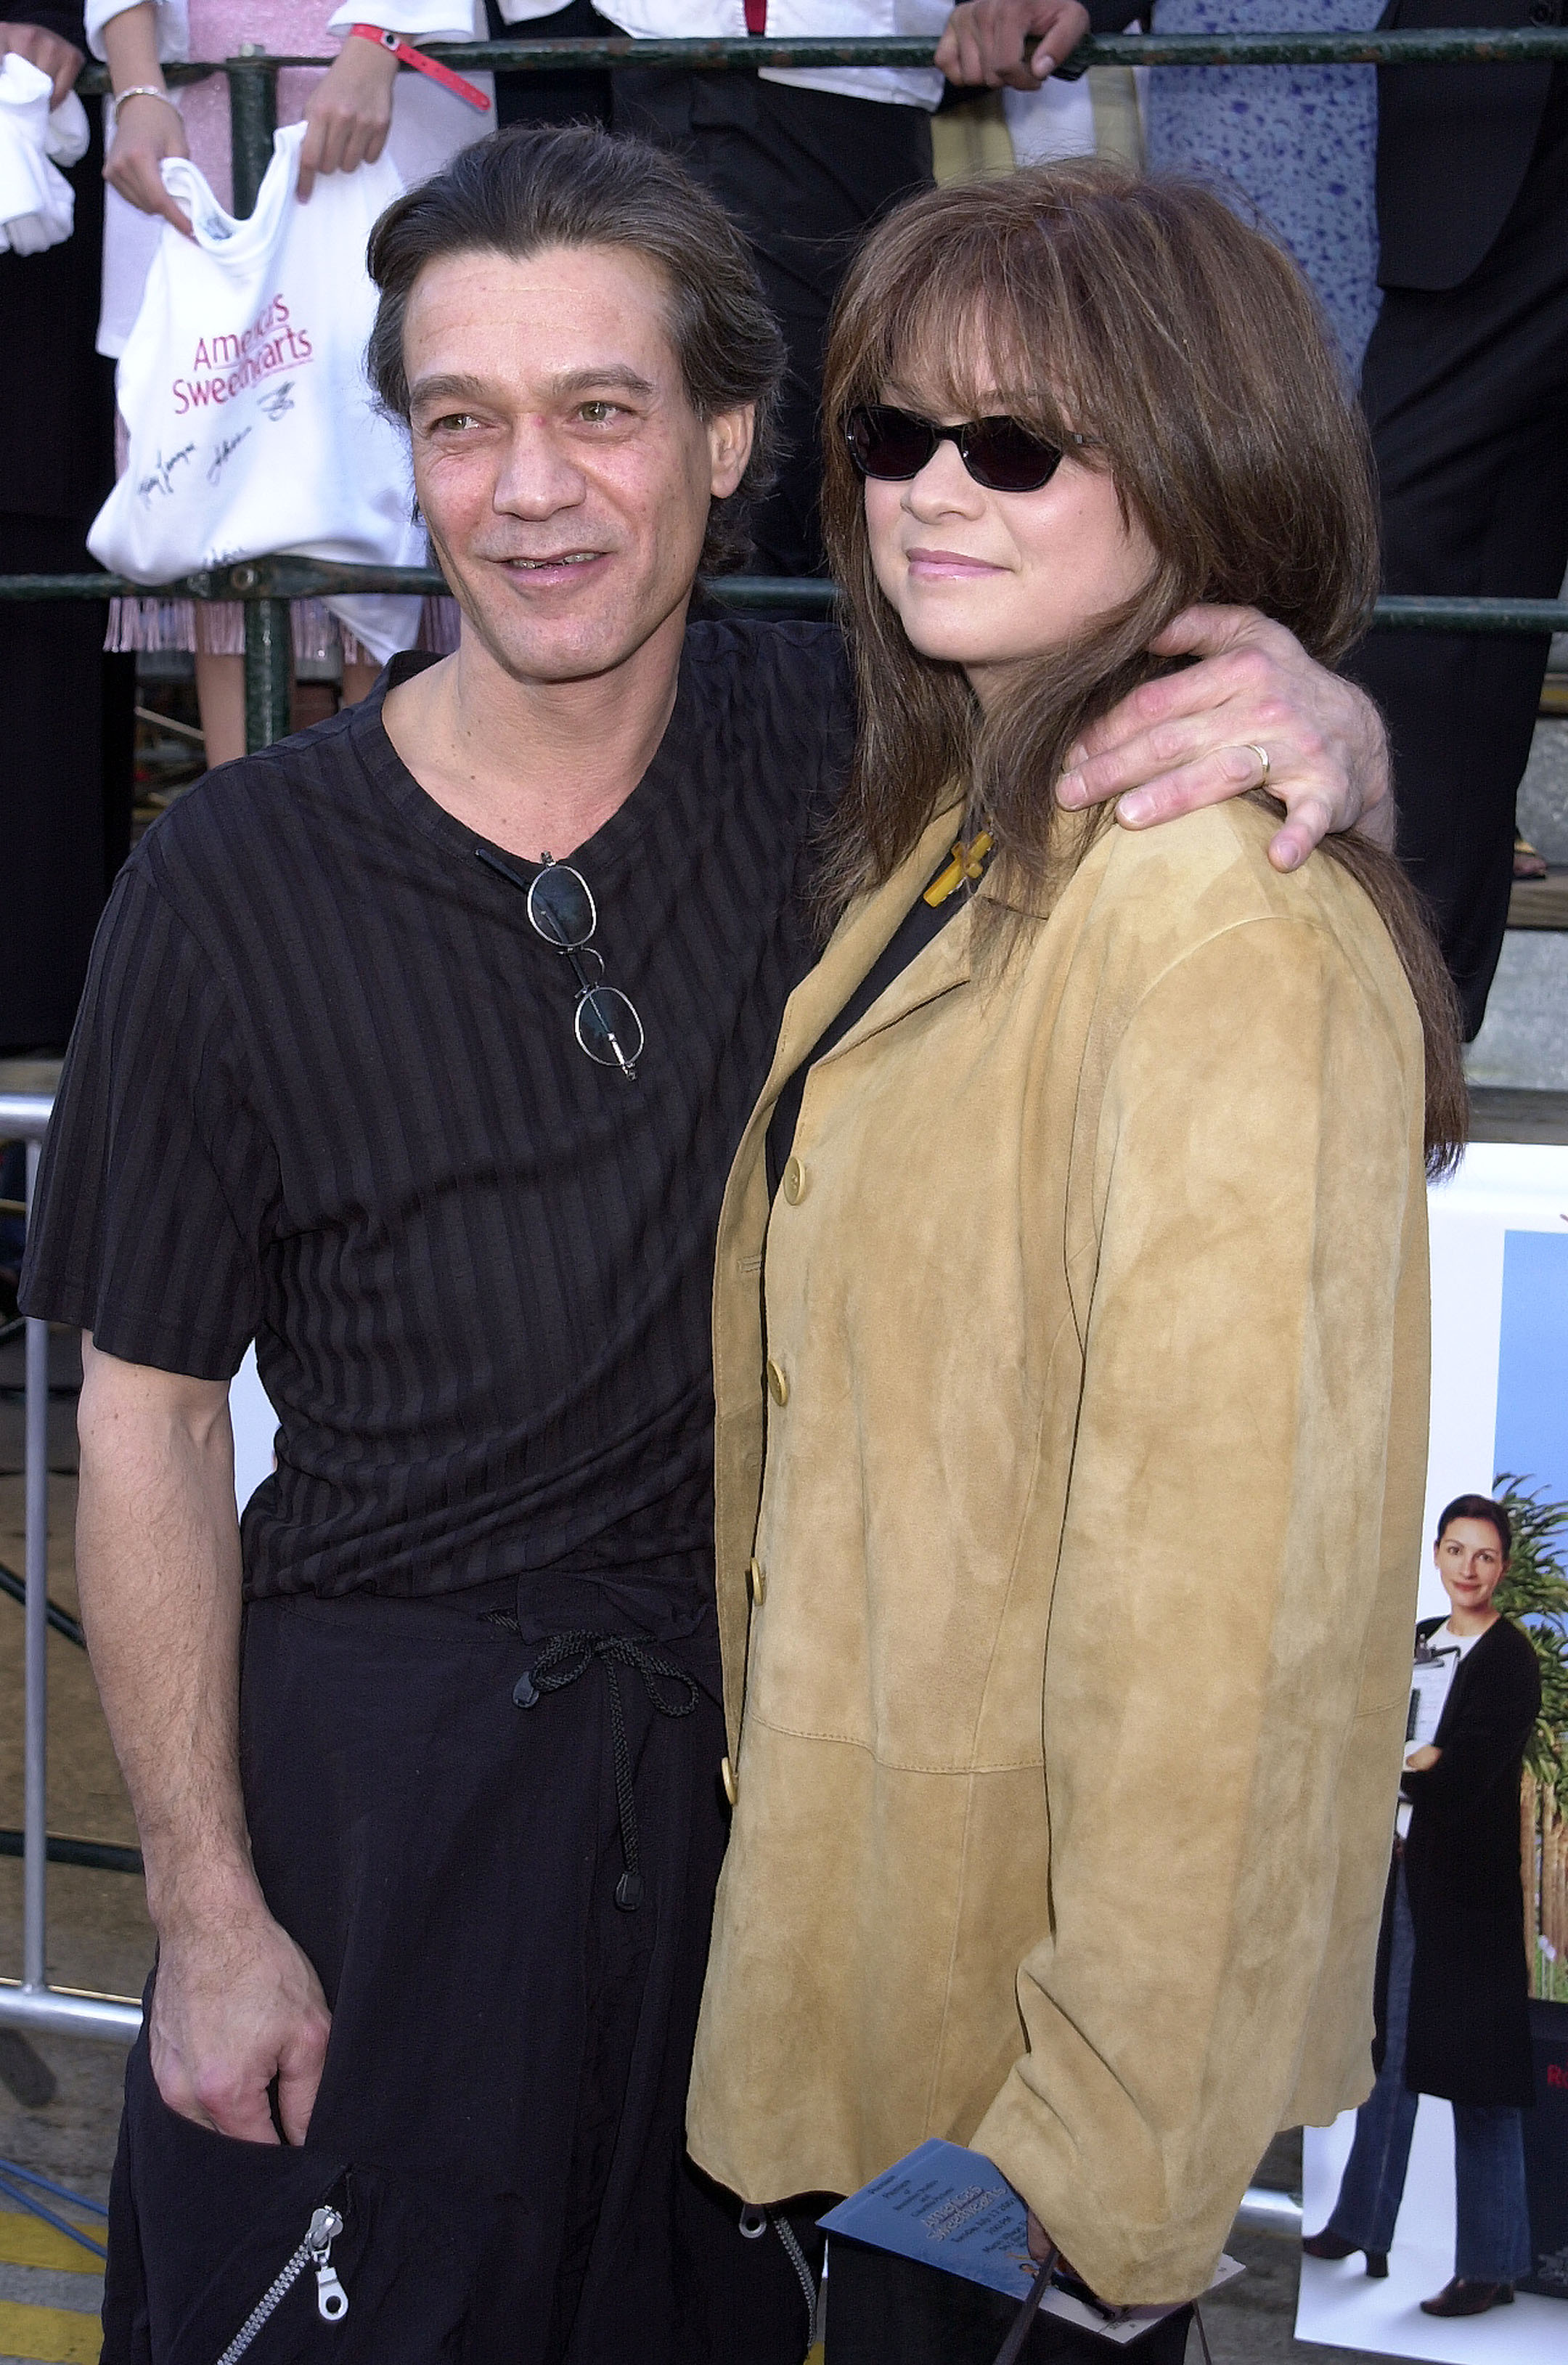 Eddie Van Halen and Valerie Bertinelli at the premiere of "America's Sweethearts" in Los Angeles, California in 2001. | Source: Getty Images